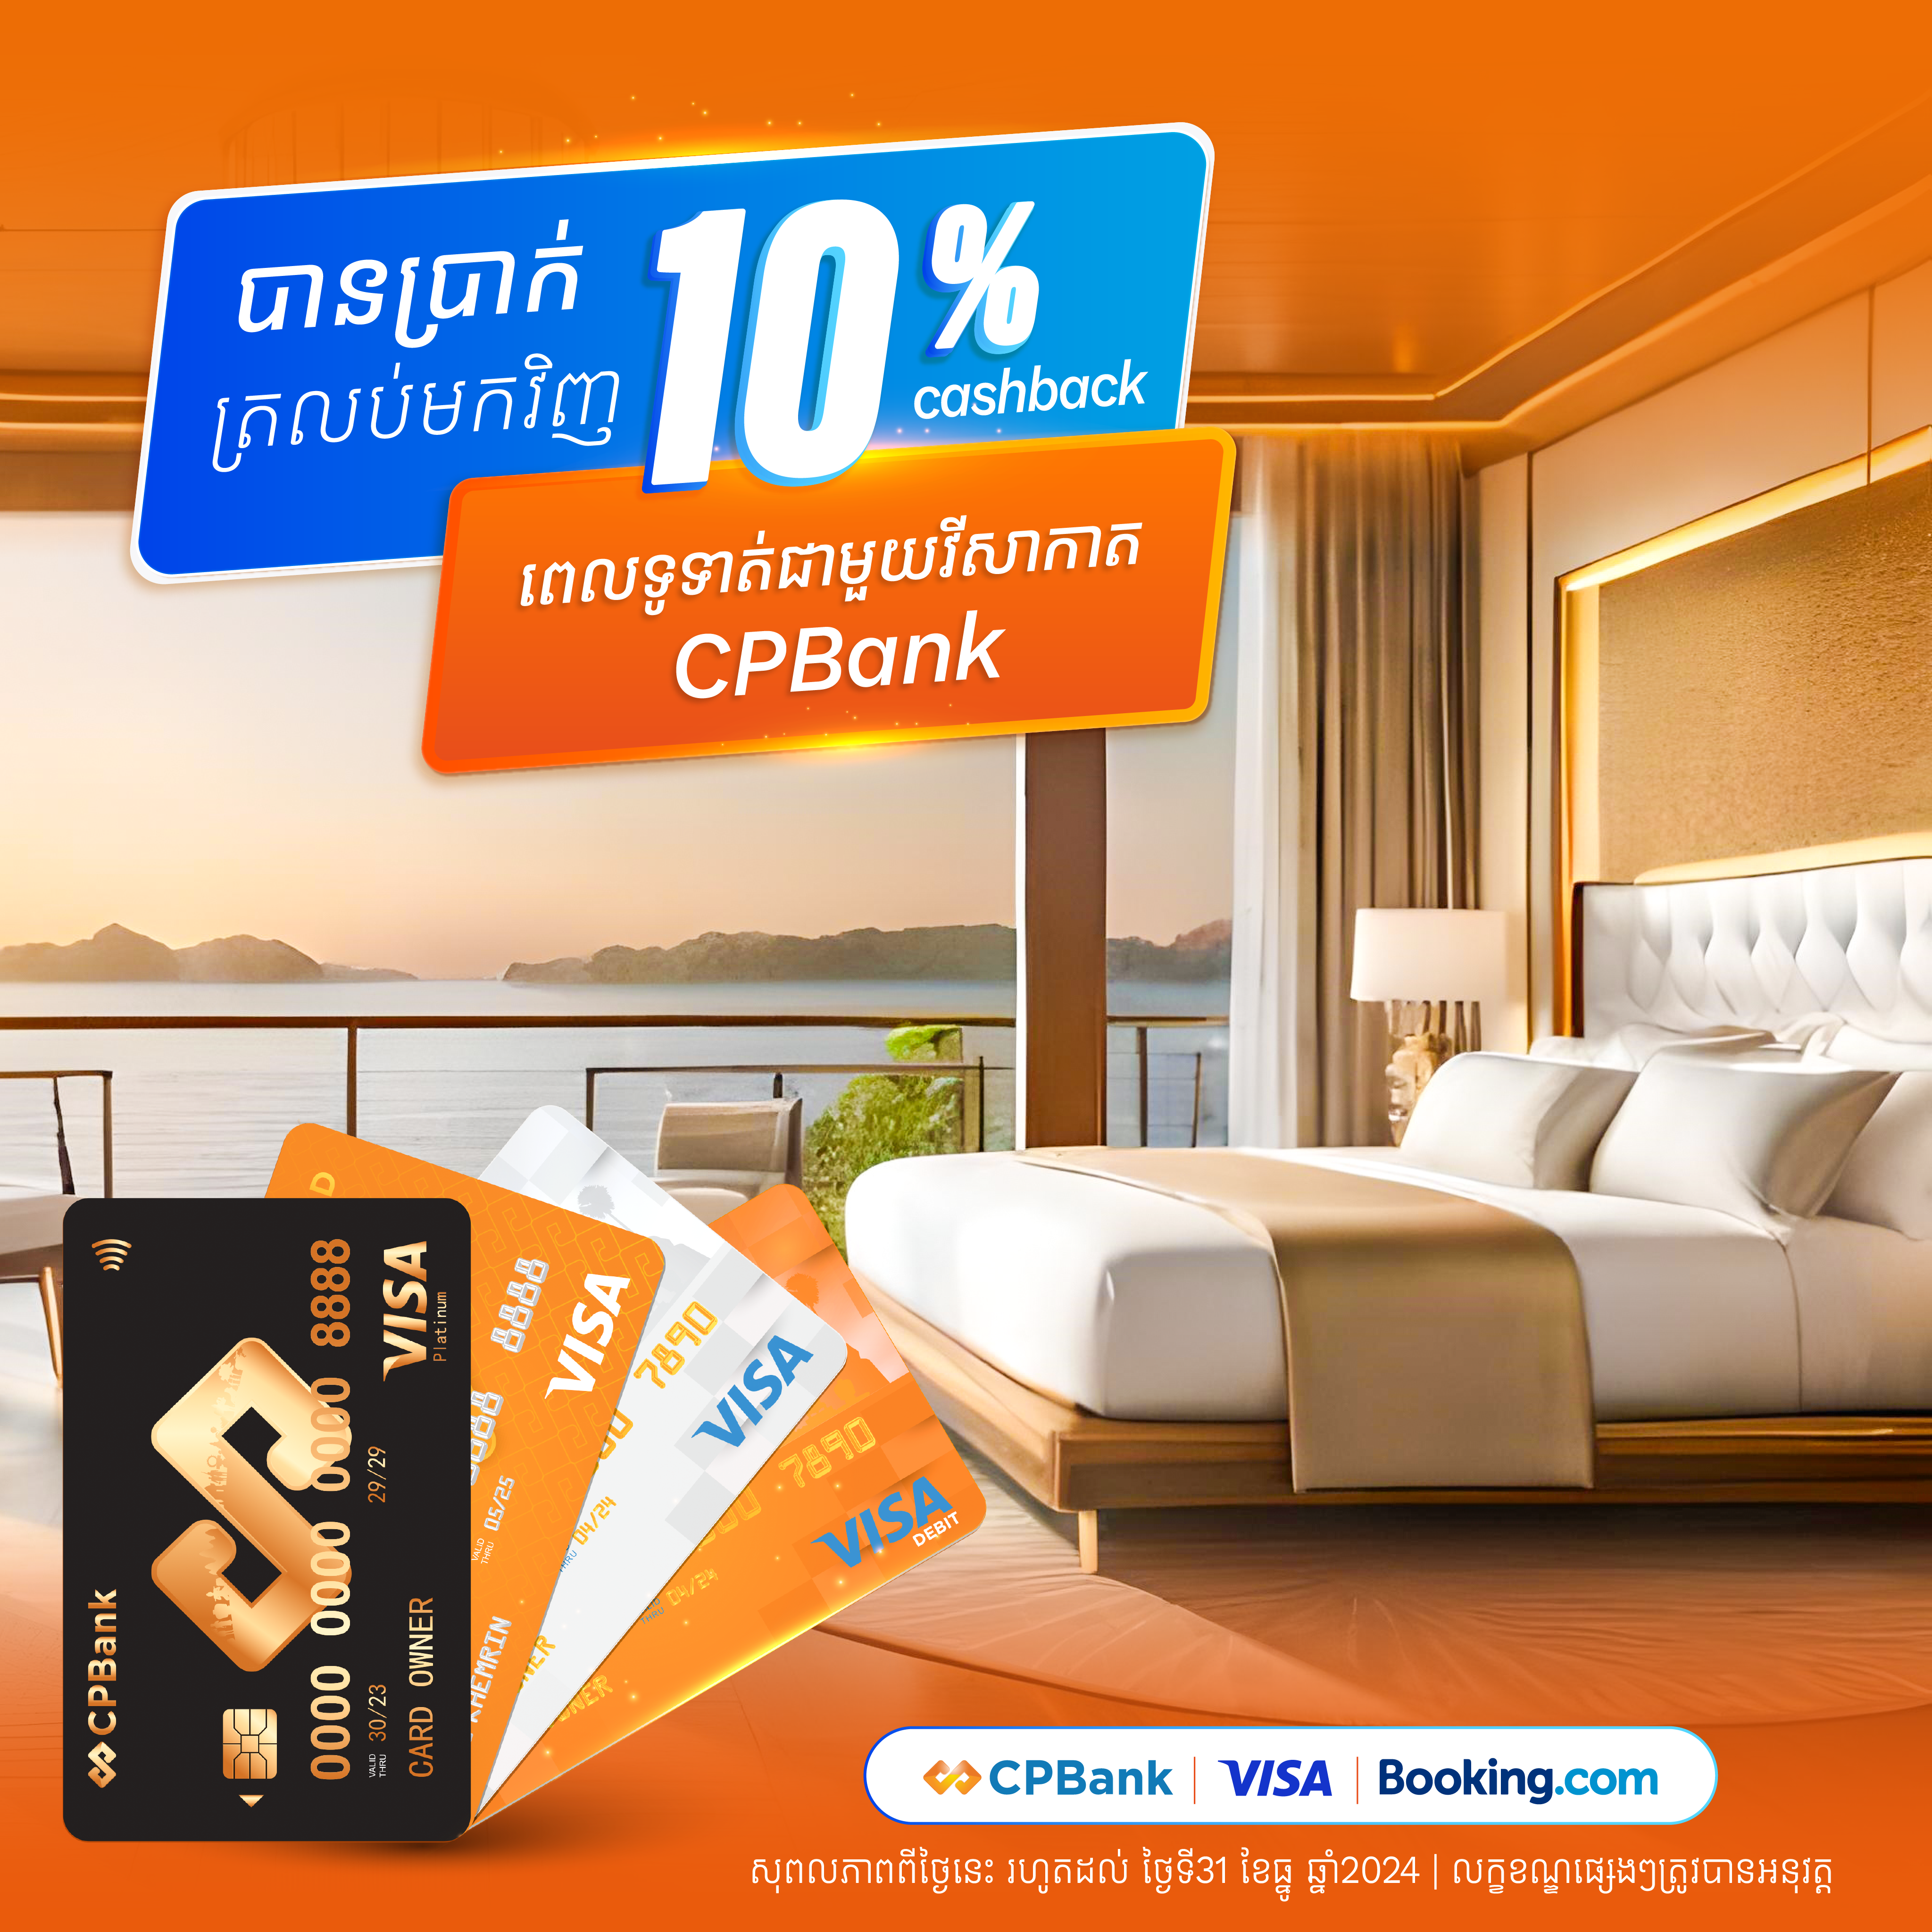 Get 10% cashback on hotel booking on the Booking.com website